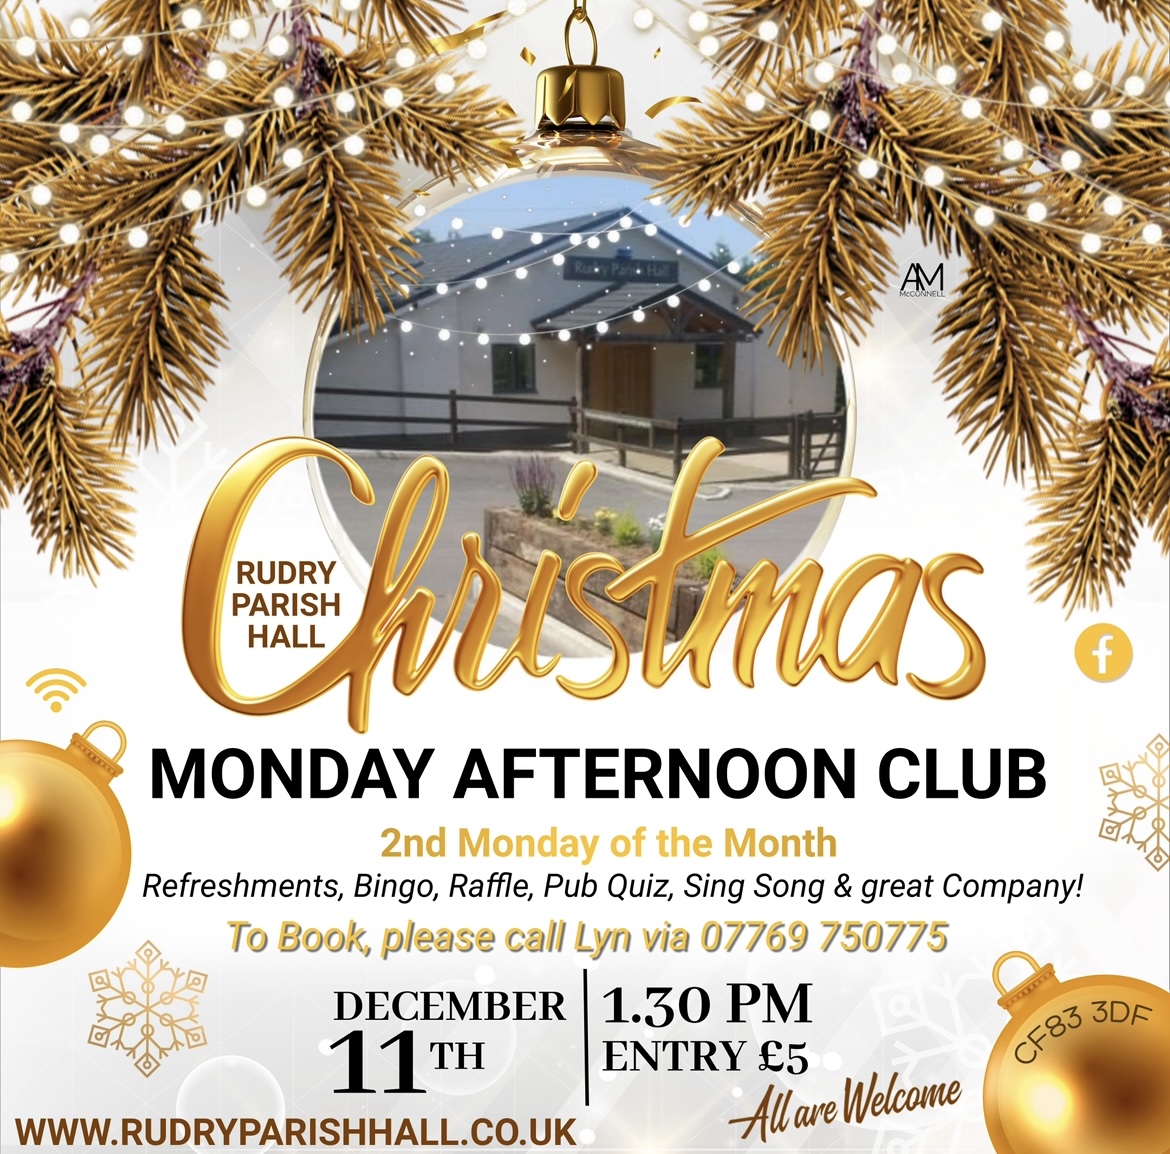 Monday Afternoon Club at Rudry Parish Hall